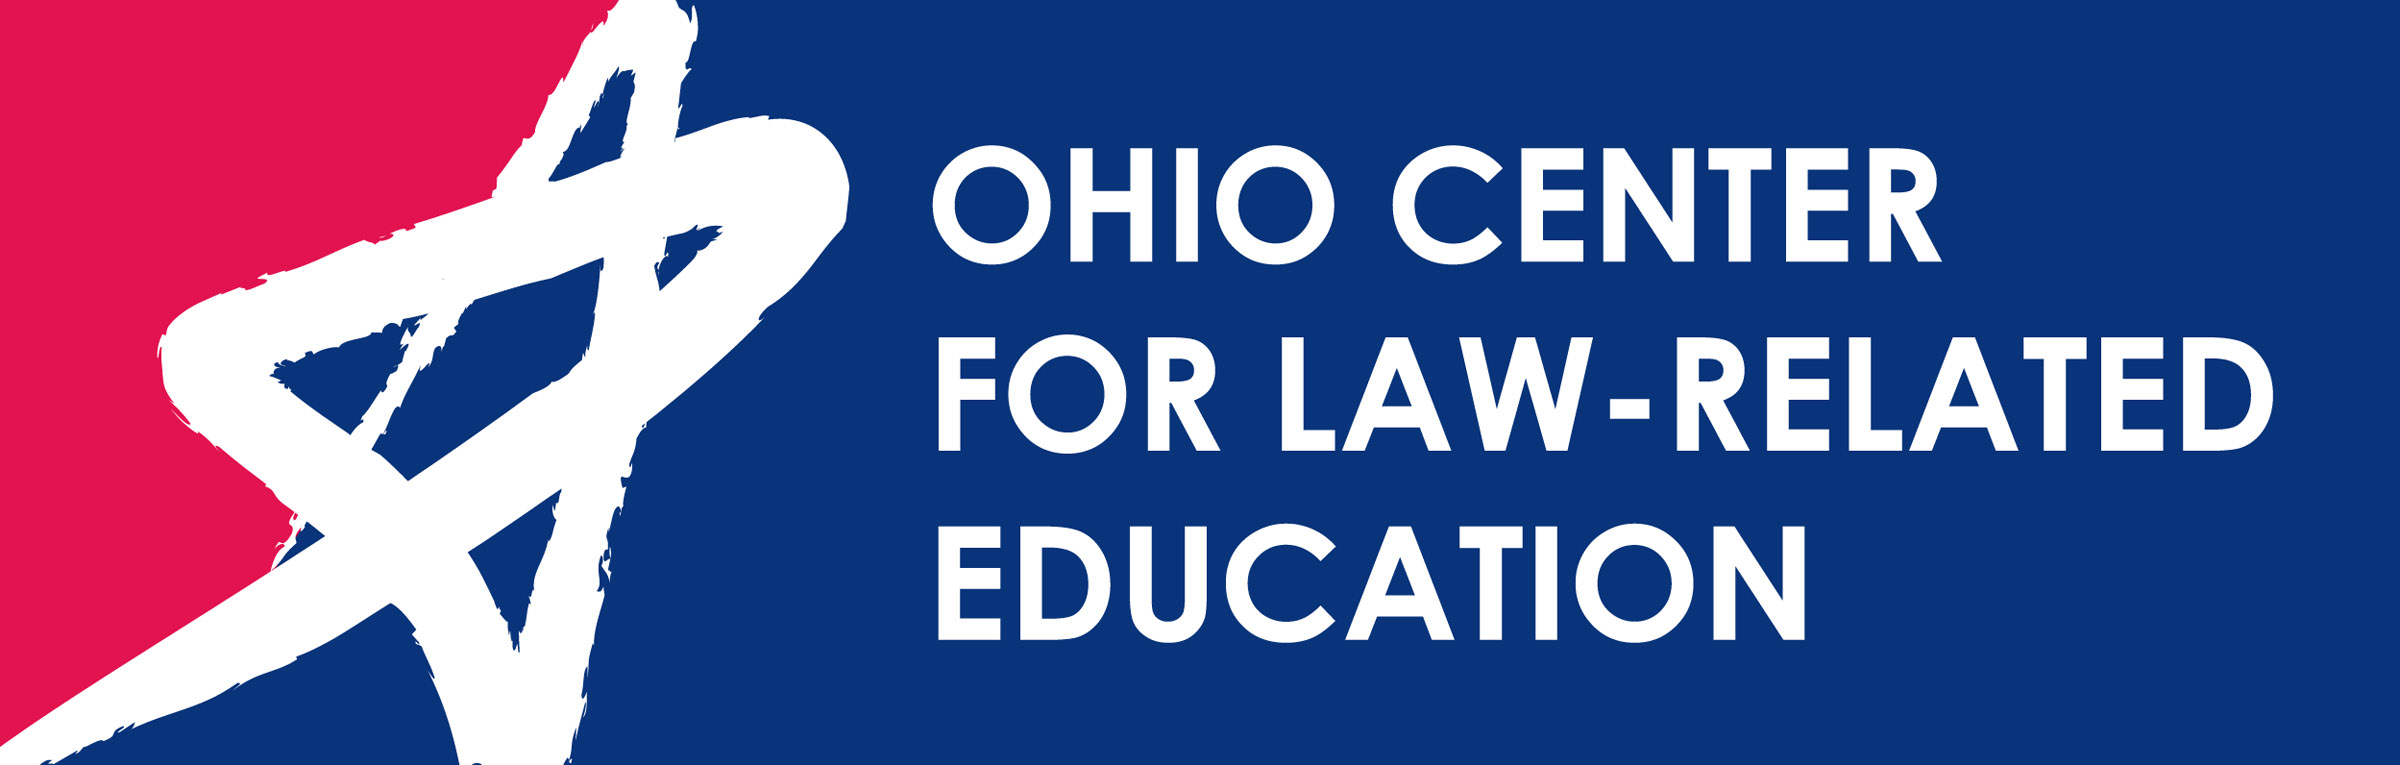 Ohio Center for Law-Related Education Teaching Toolbox